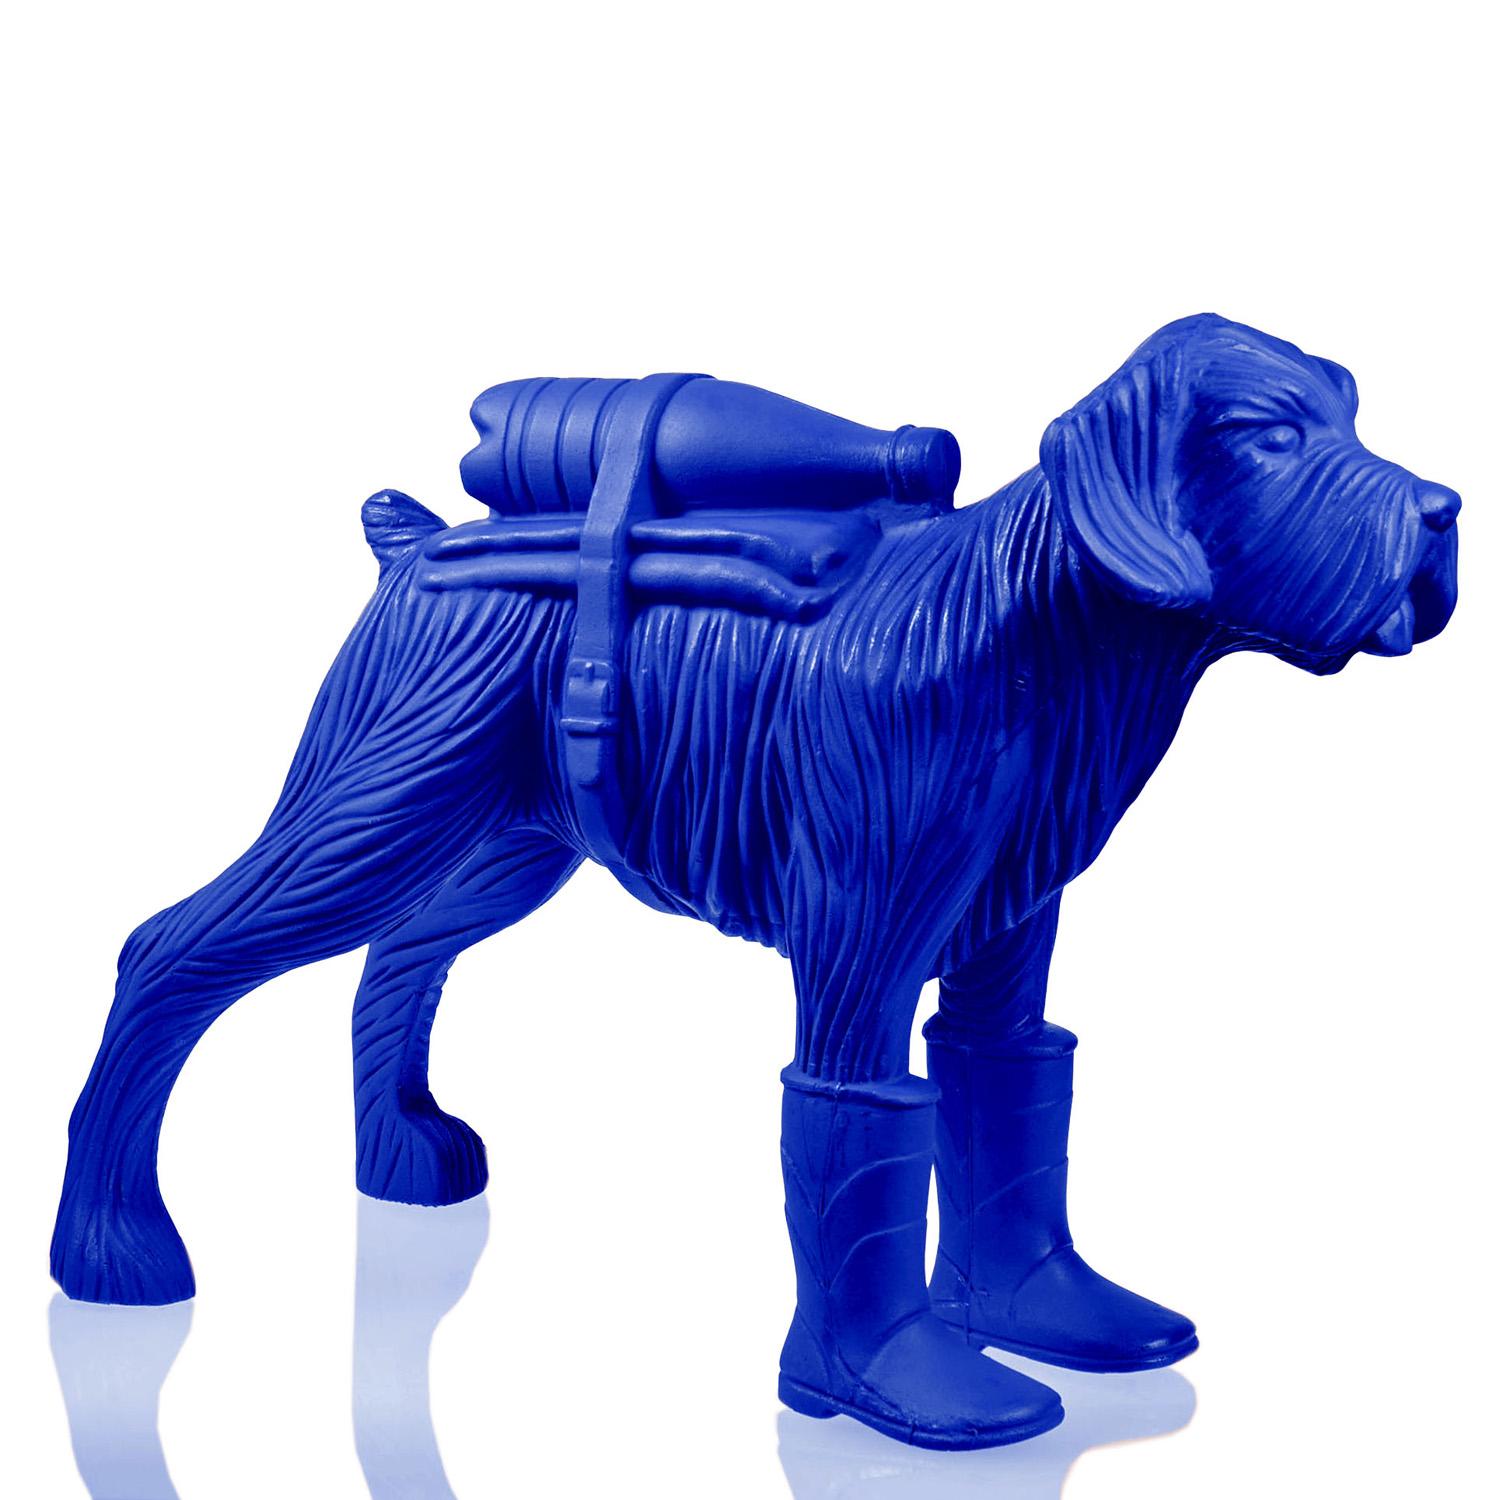 Cloned Schnauzer with water bottle  - Sculpture by William Sweetlove